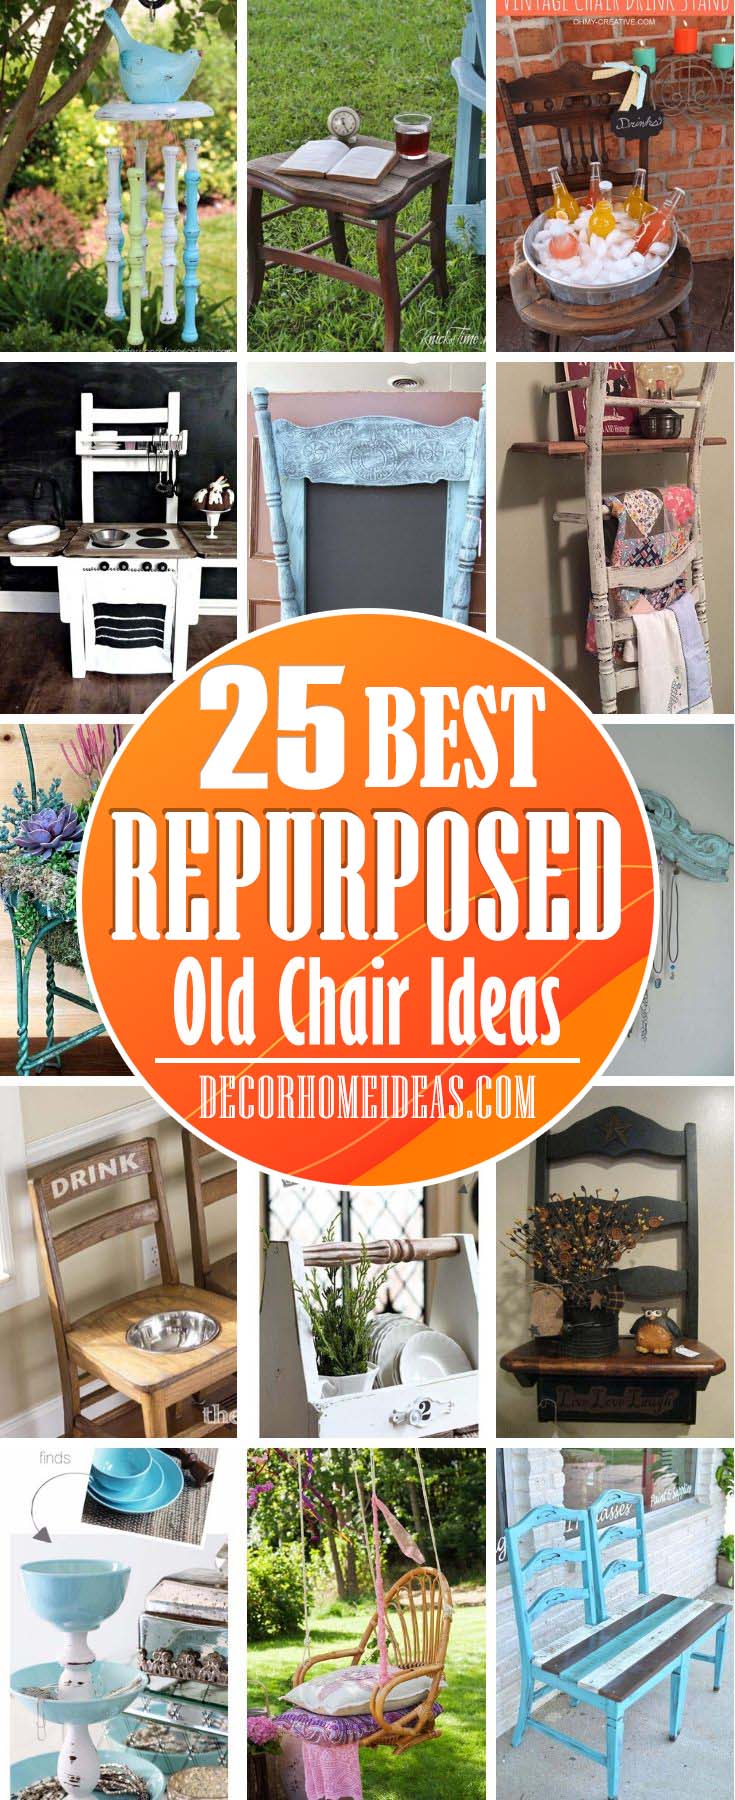 Repurposed Old Chairs. Get some fresh and creative ideas on repurposing old chairs into something beautiful and useful. #old #chair #repurposed #decorhomeideas